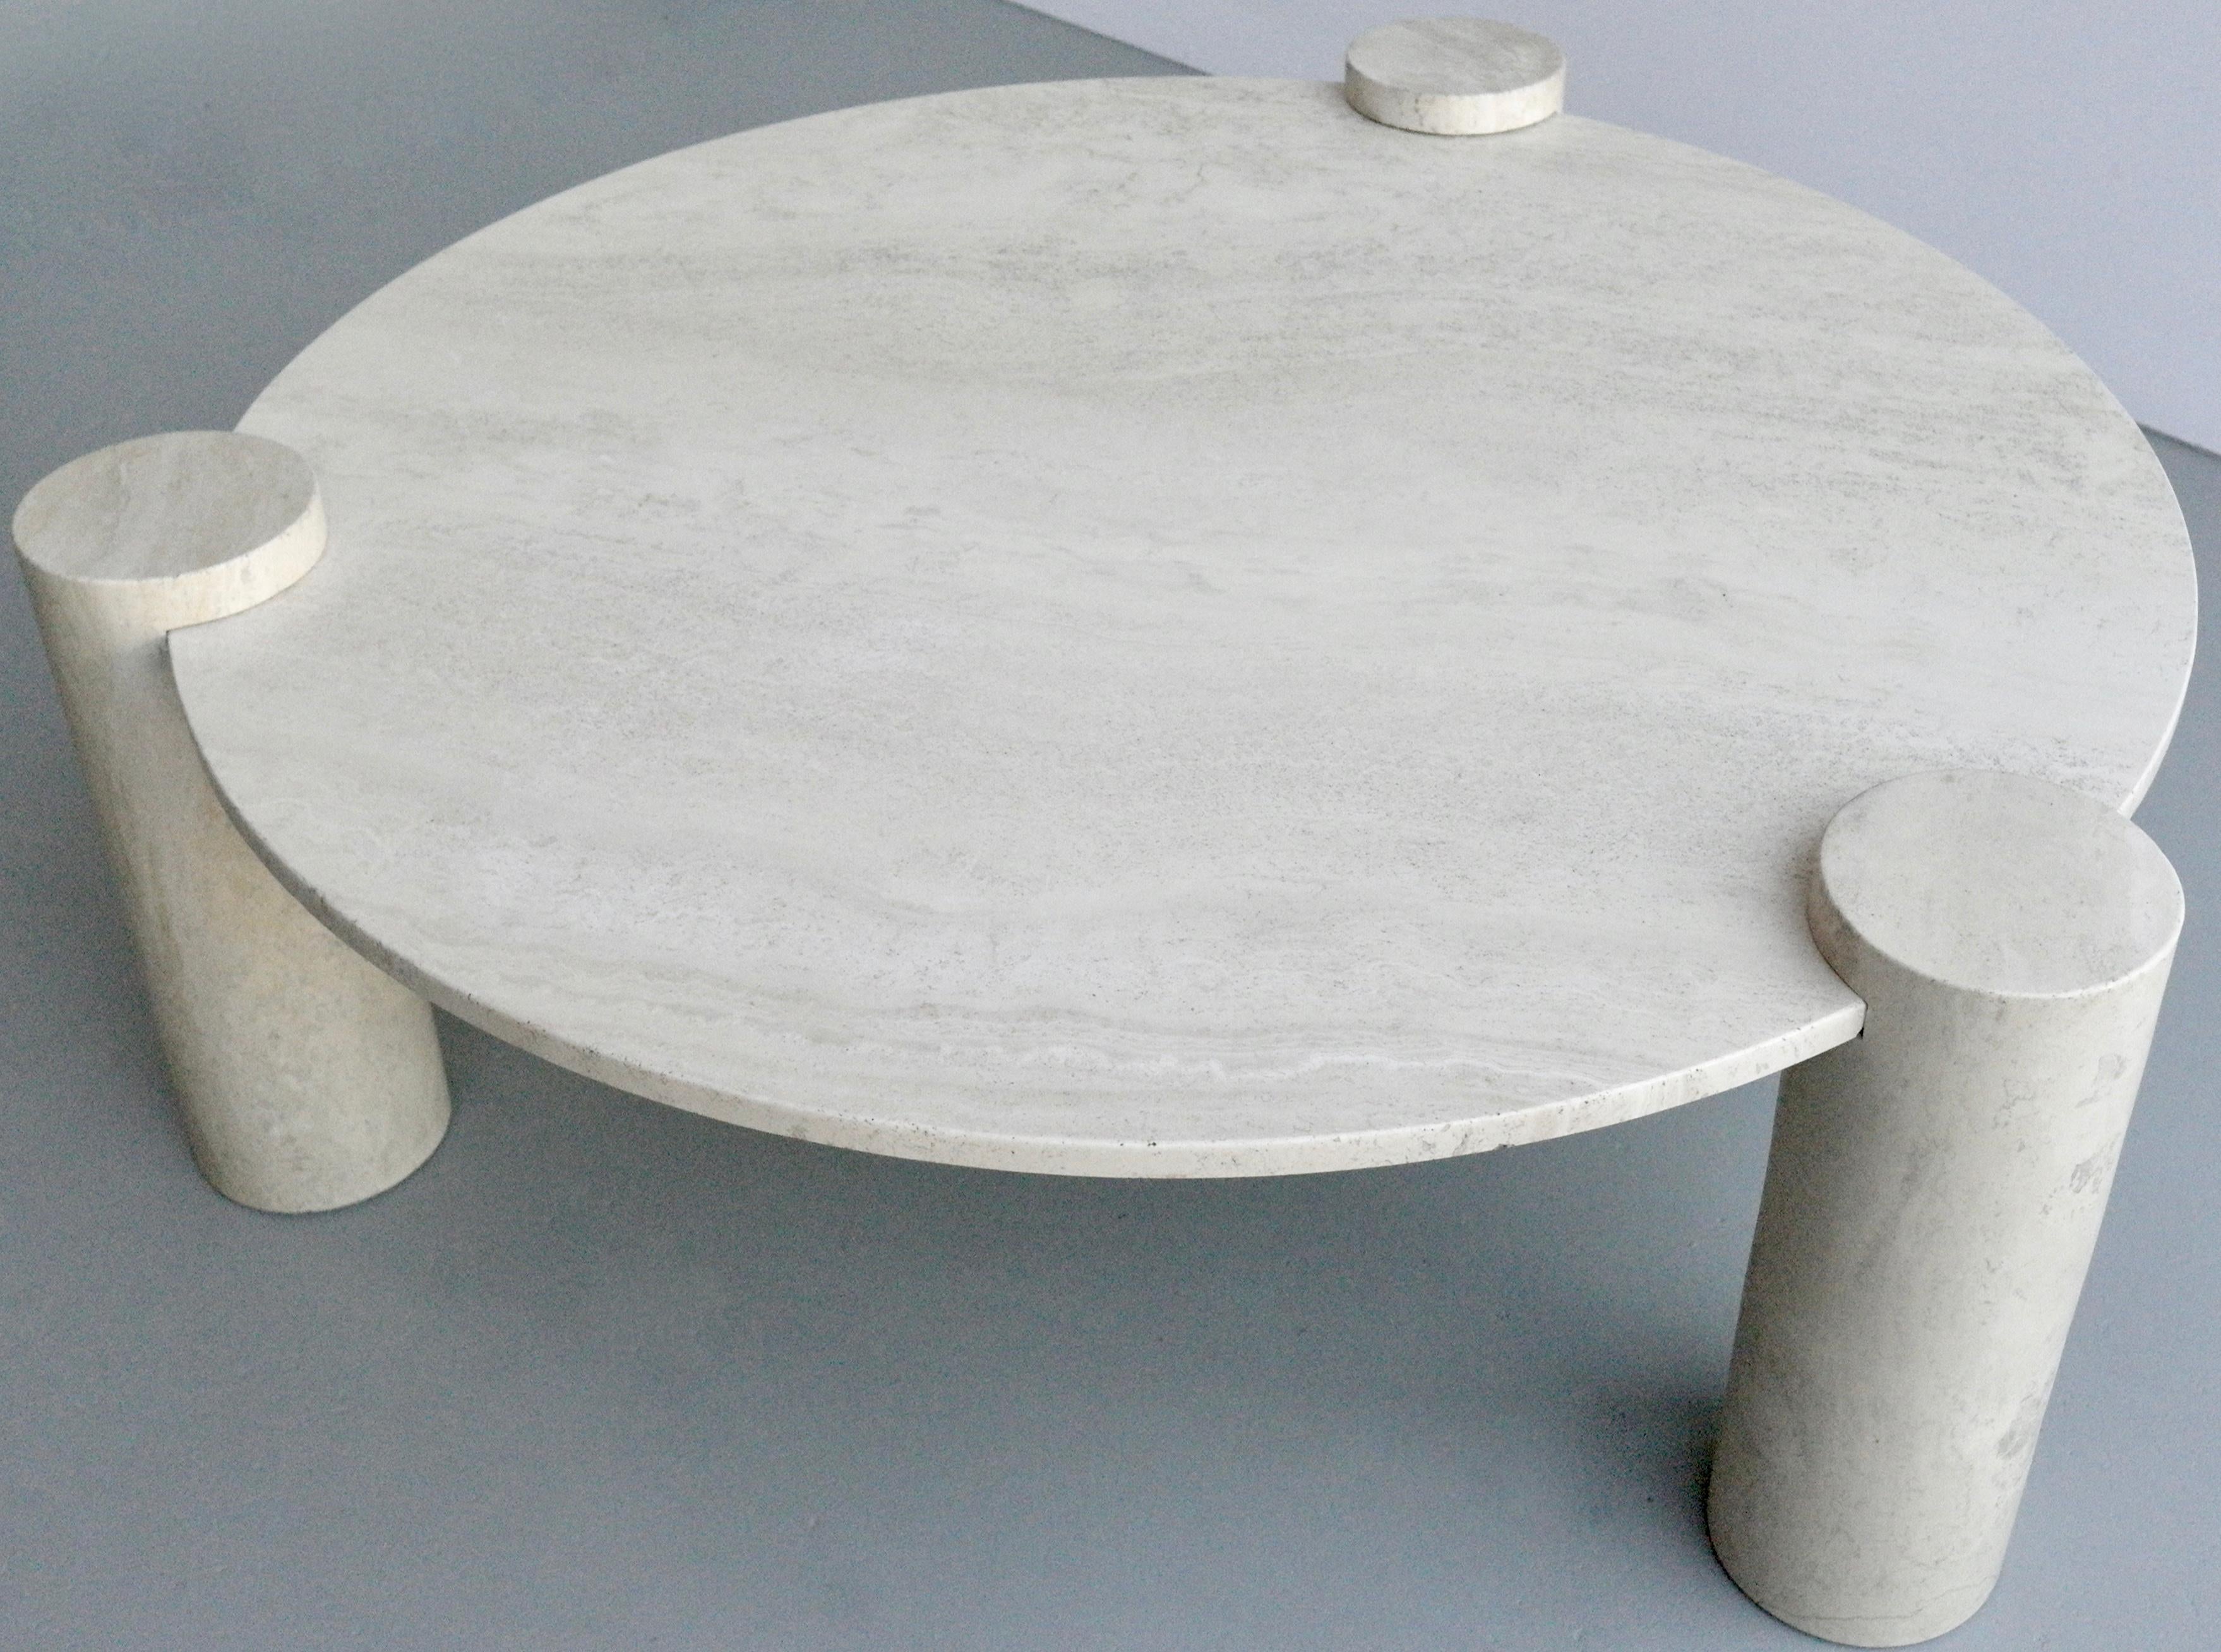 Large round organic three legged travertine coffee table, Italy, 1970s.

Diameter top 110 cm, total diameter incl legs 117.5. Height to the table top 40 cm, total height 45cm.